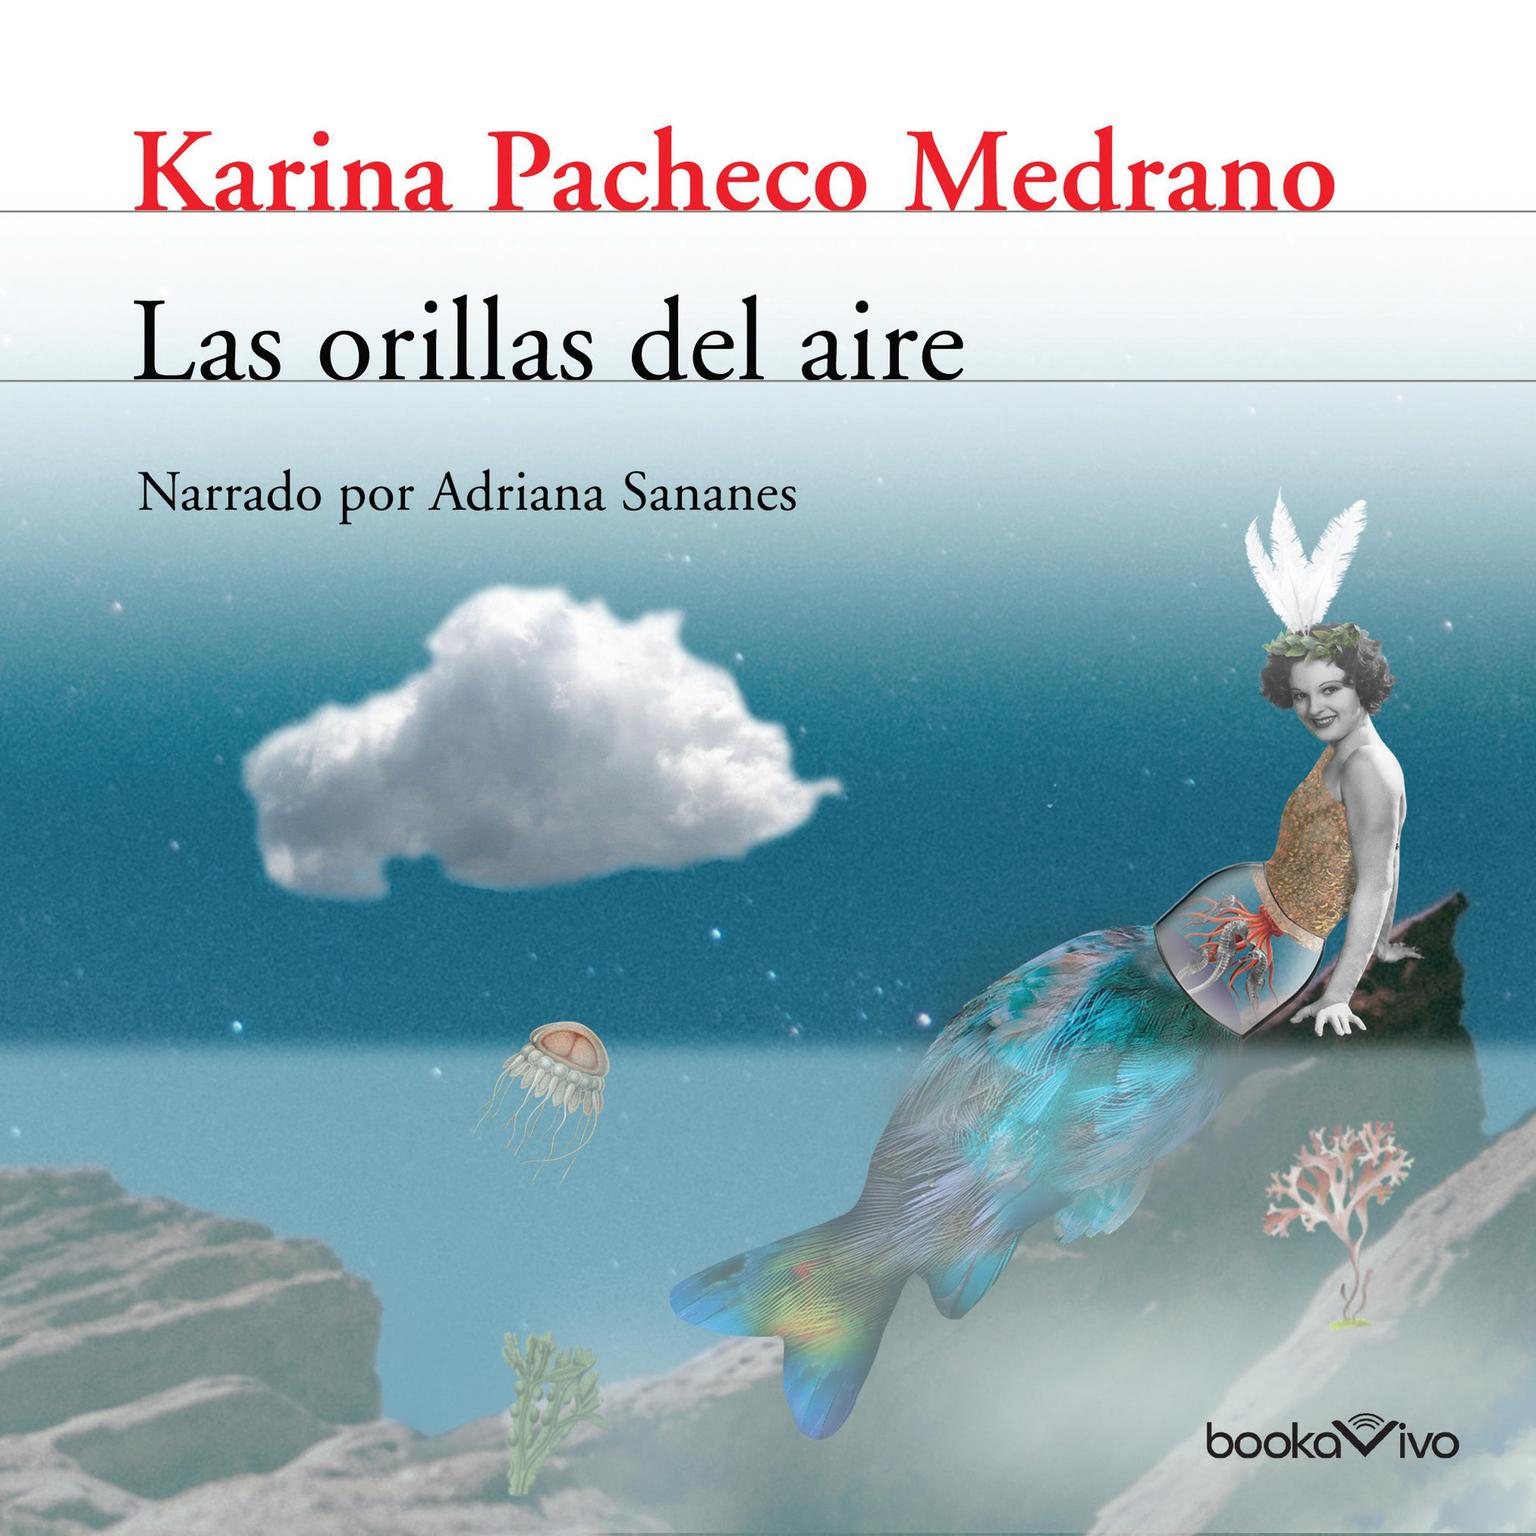 Las Orillas del Aire (The Banks of the Air) Audiobook, by Karina Pacheco Medrano